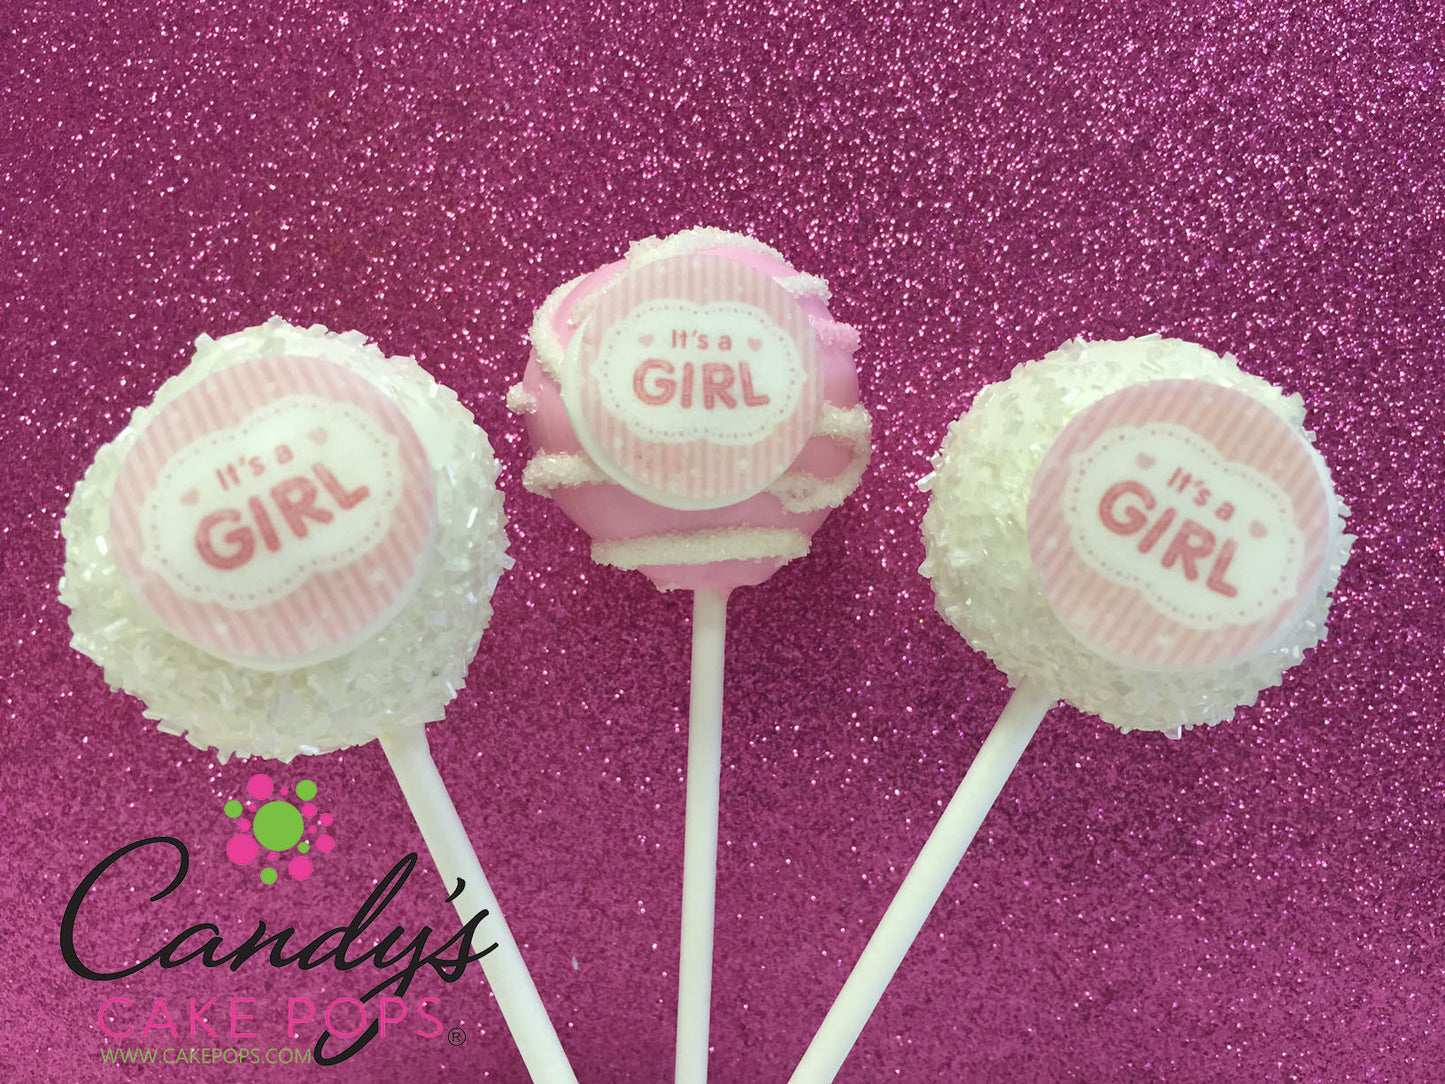 It's A Girl Edible Decal Cake Pops Baby Shower - Candy's Cake Pops